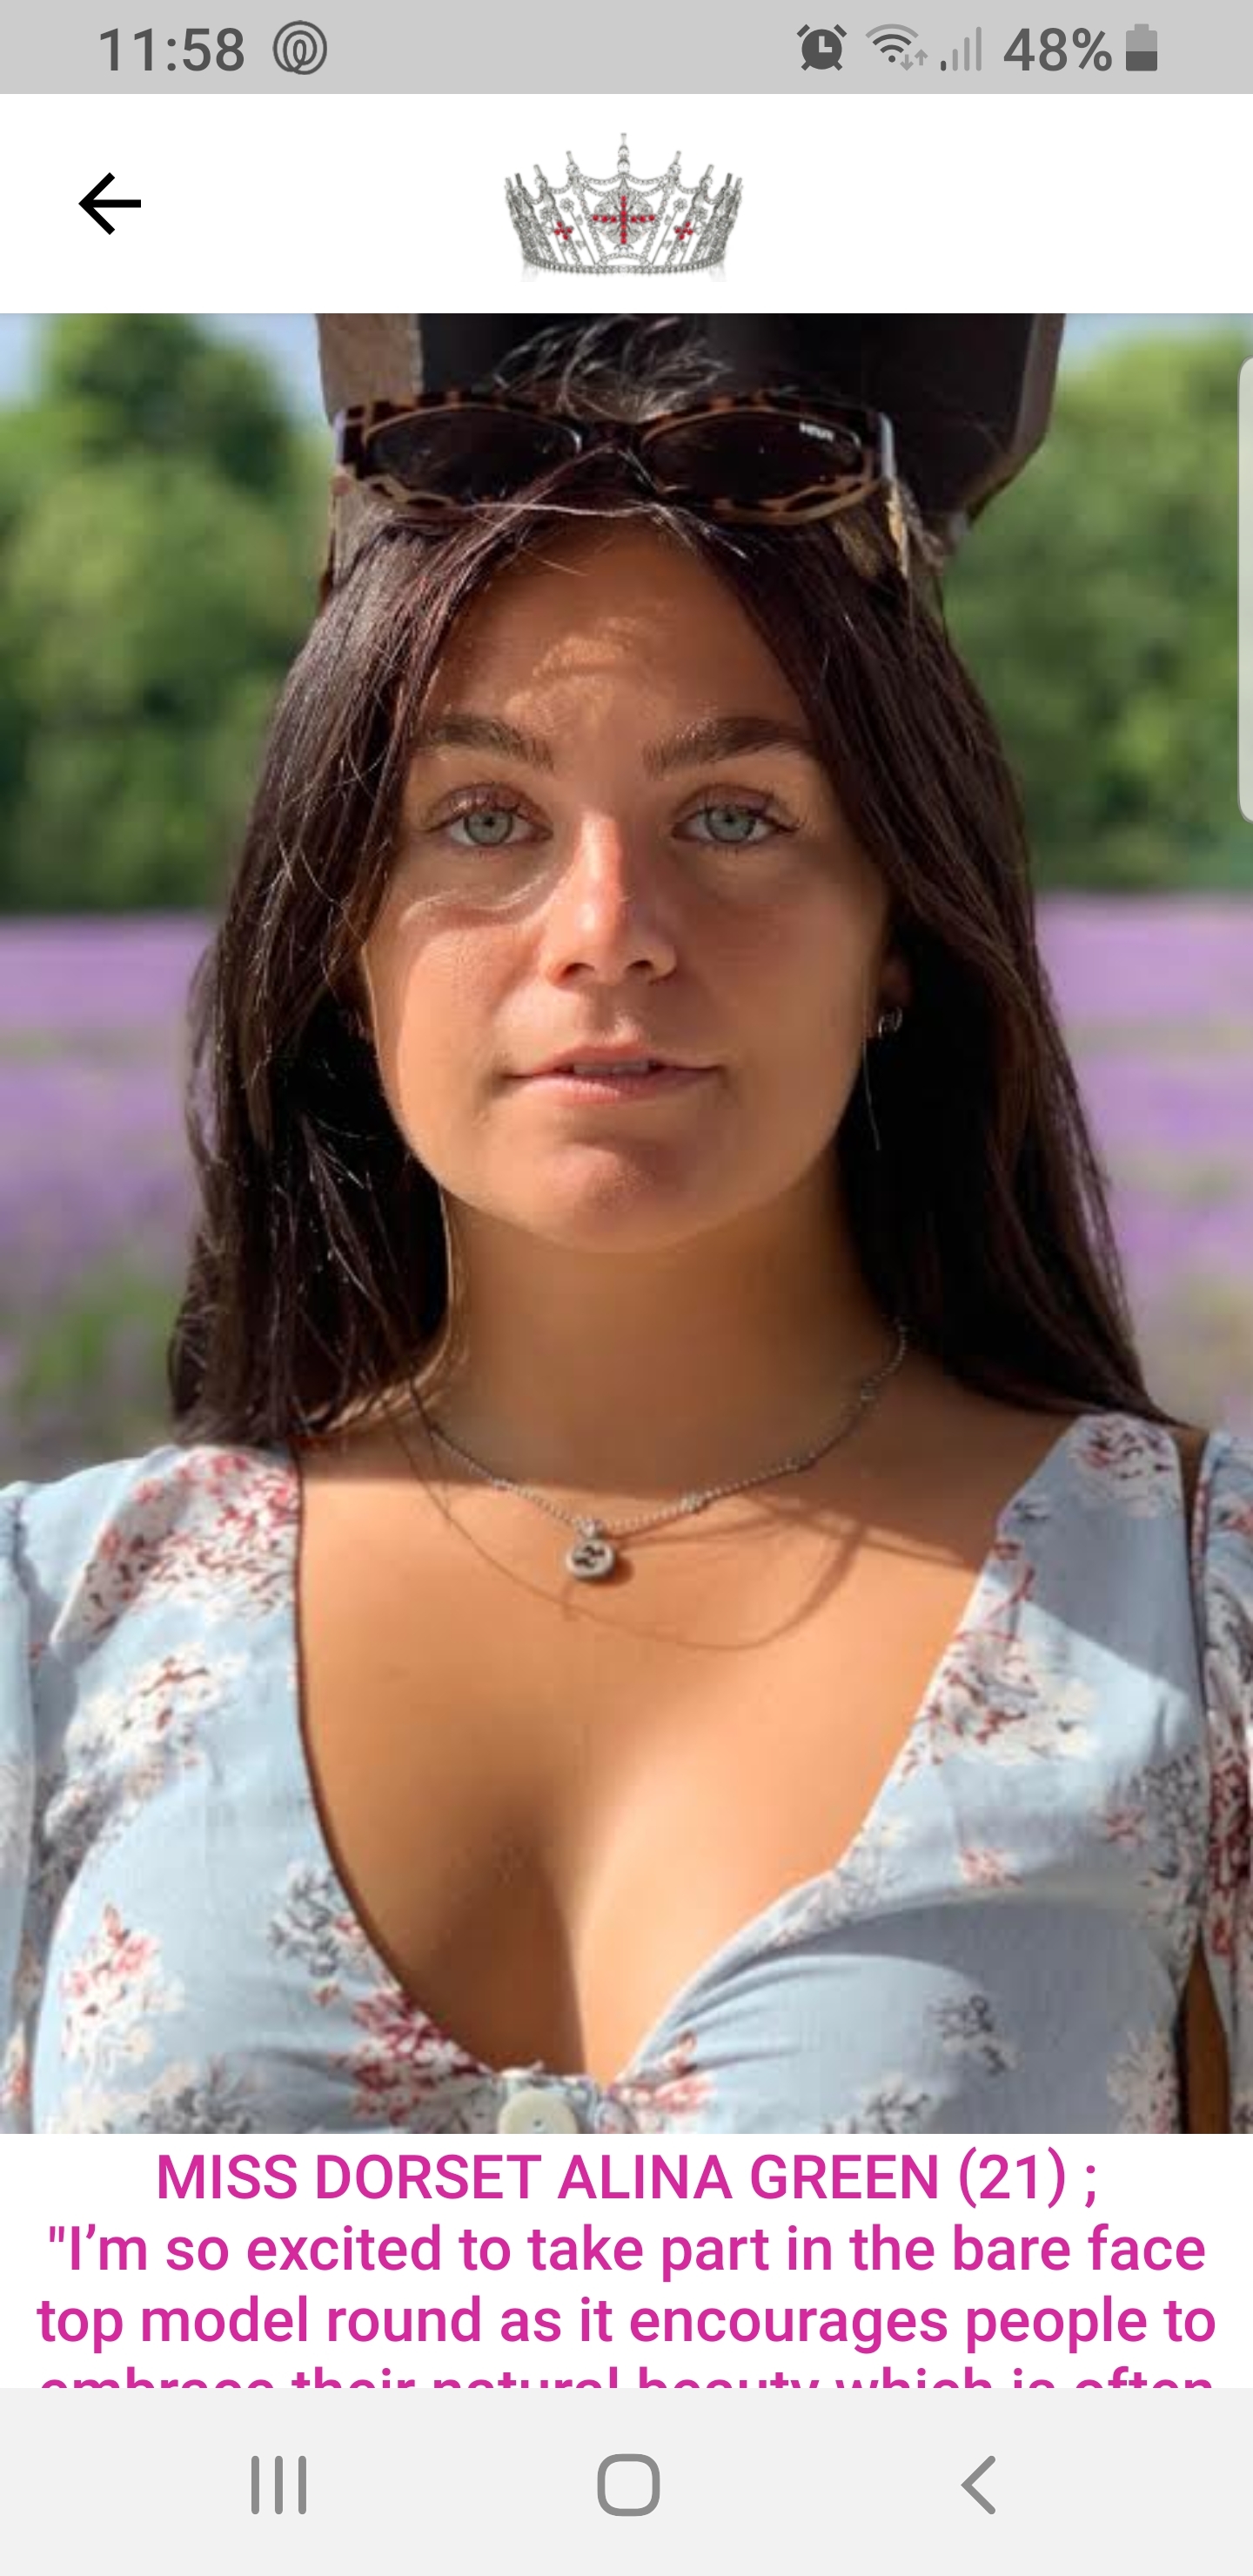 Alina Green without any makeup on